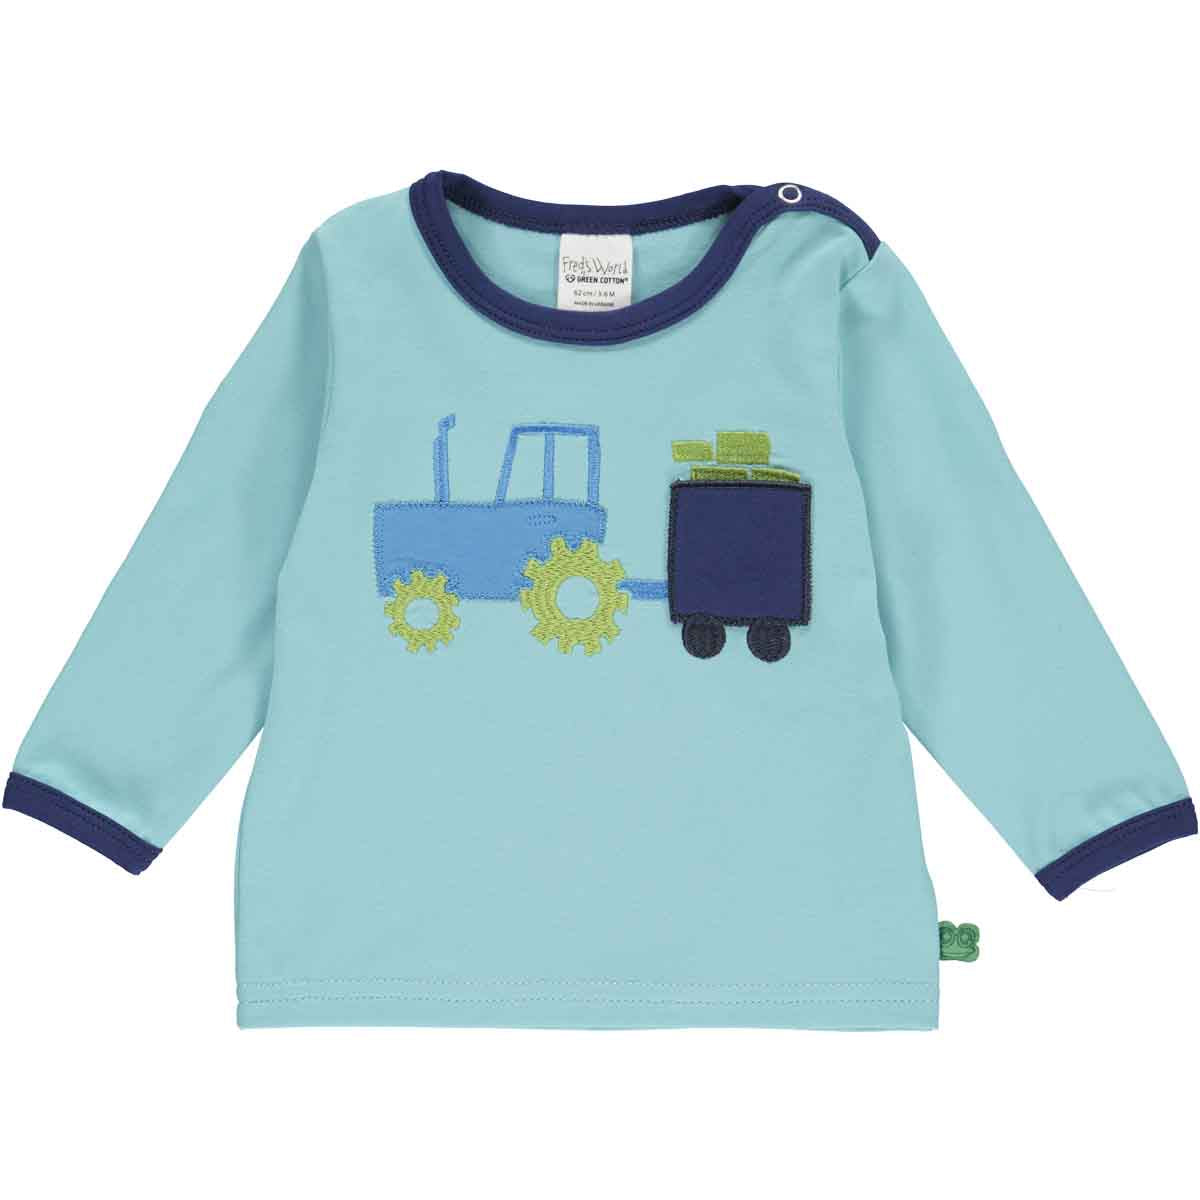 Fred's World organic Long sleeve top- tractor appliqué